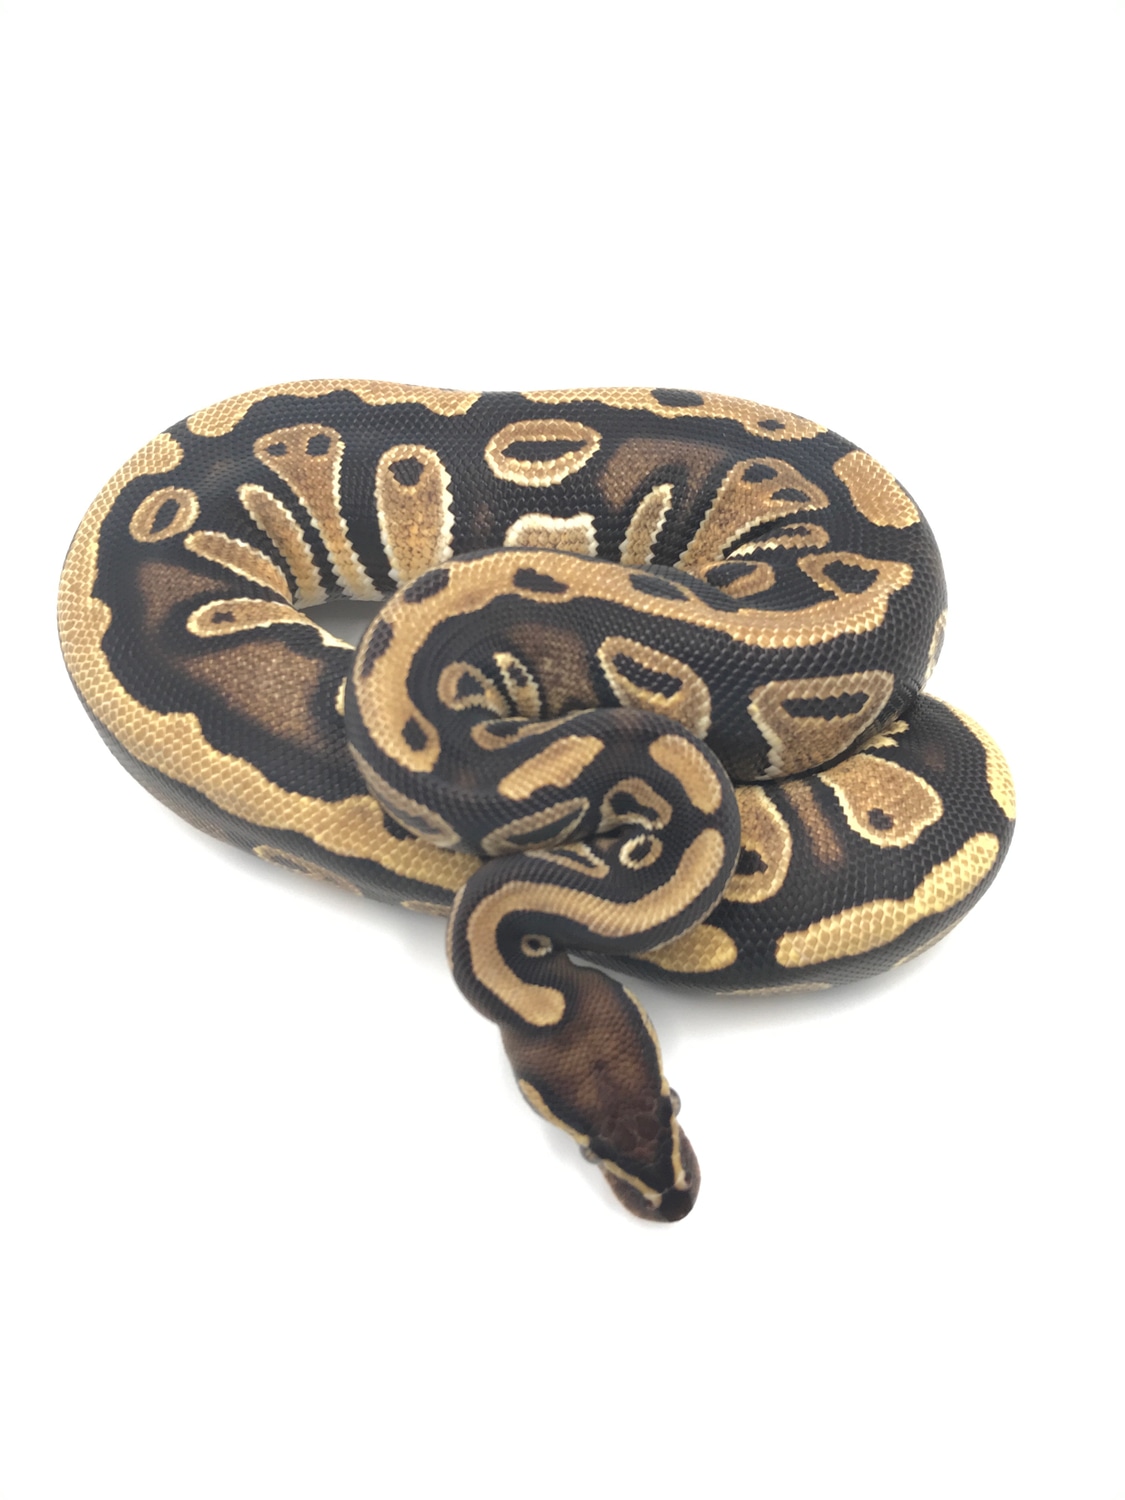 1Wrecking Het Pied Ball Python by Wreck room snakes